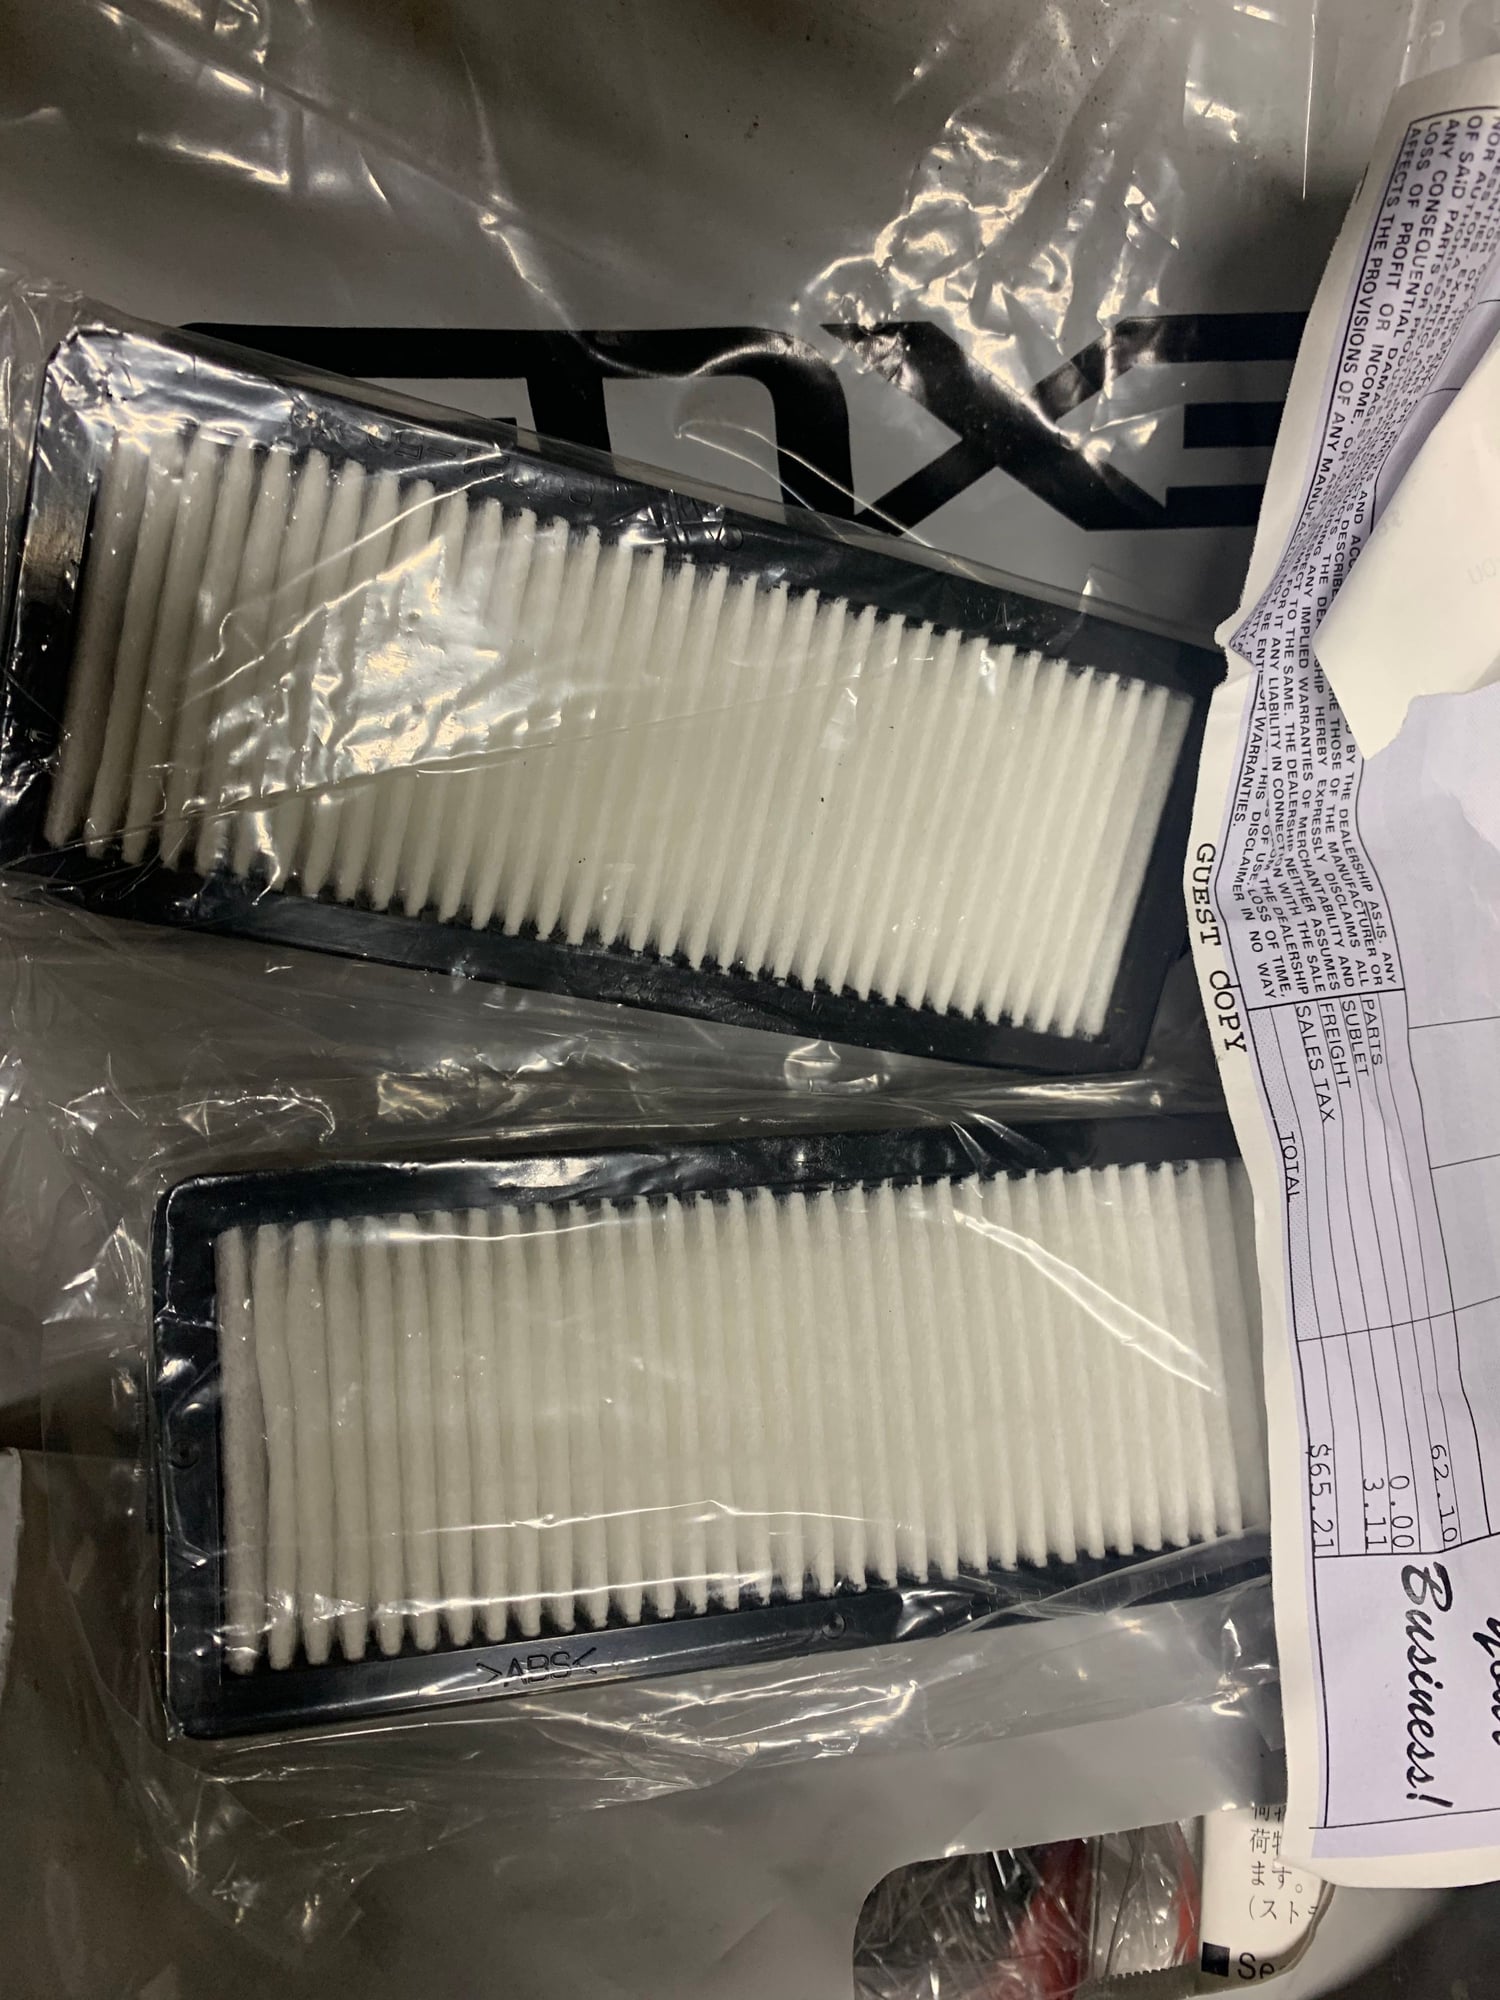 Miscellaneous - Ls430 seat filters, Spark plugs and Oil filter.  All for $59 shipped - New - All Years Lexus LS430 - Green Bay, WI 54301, United States